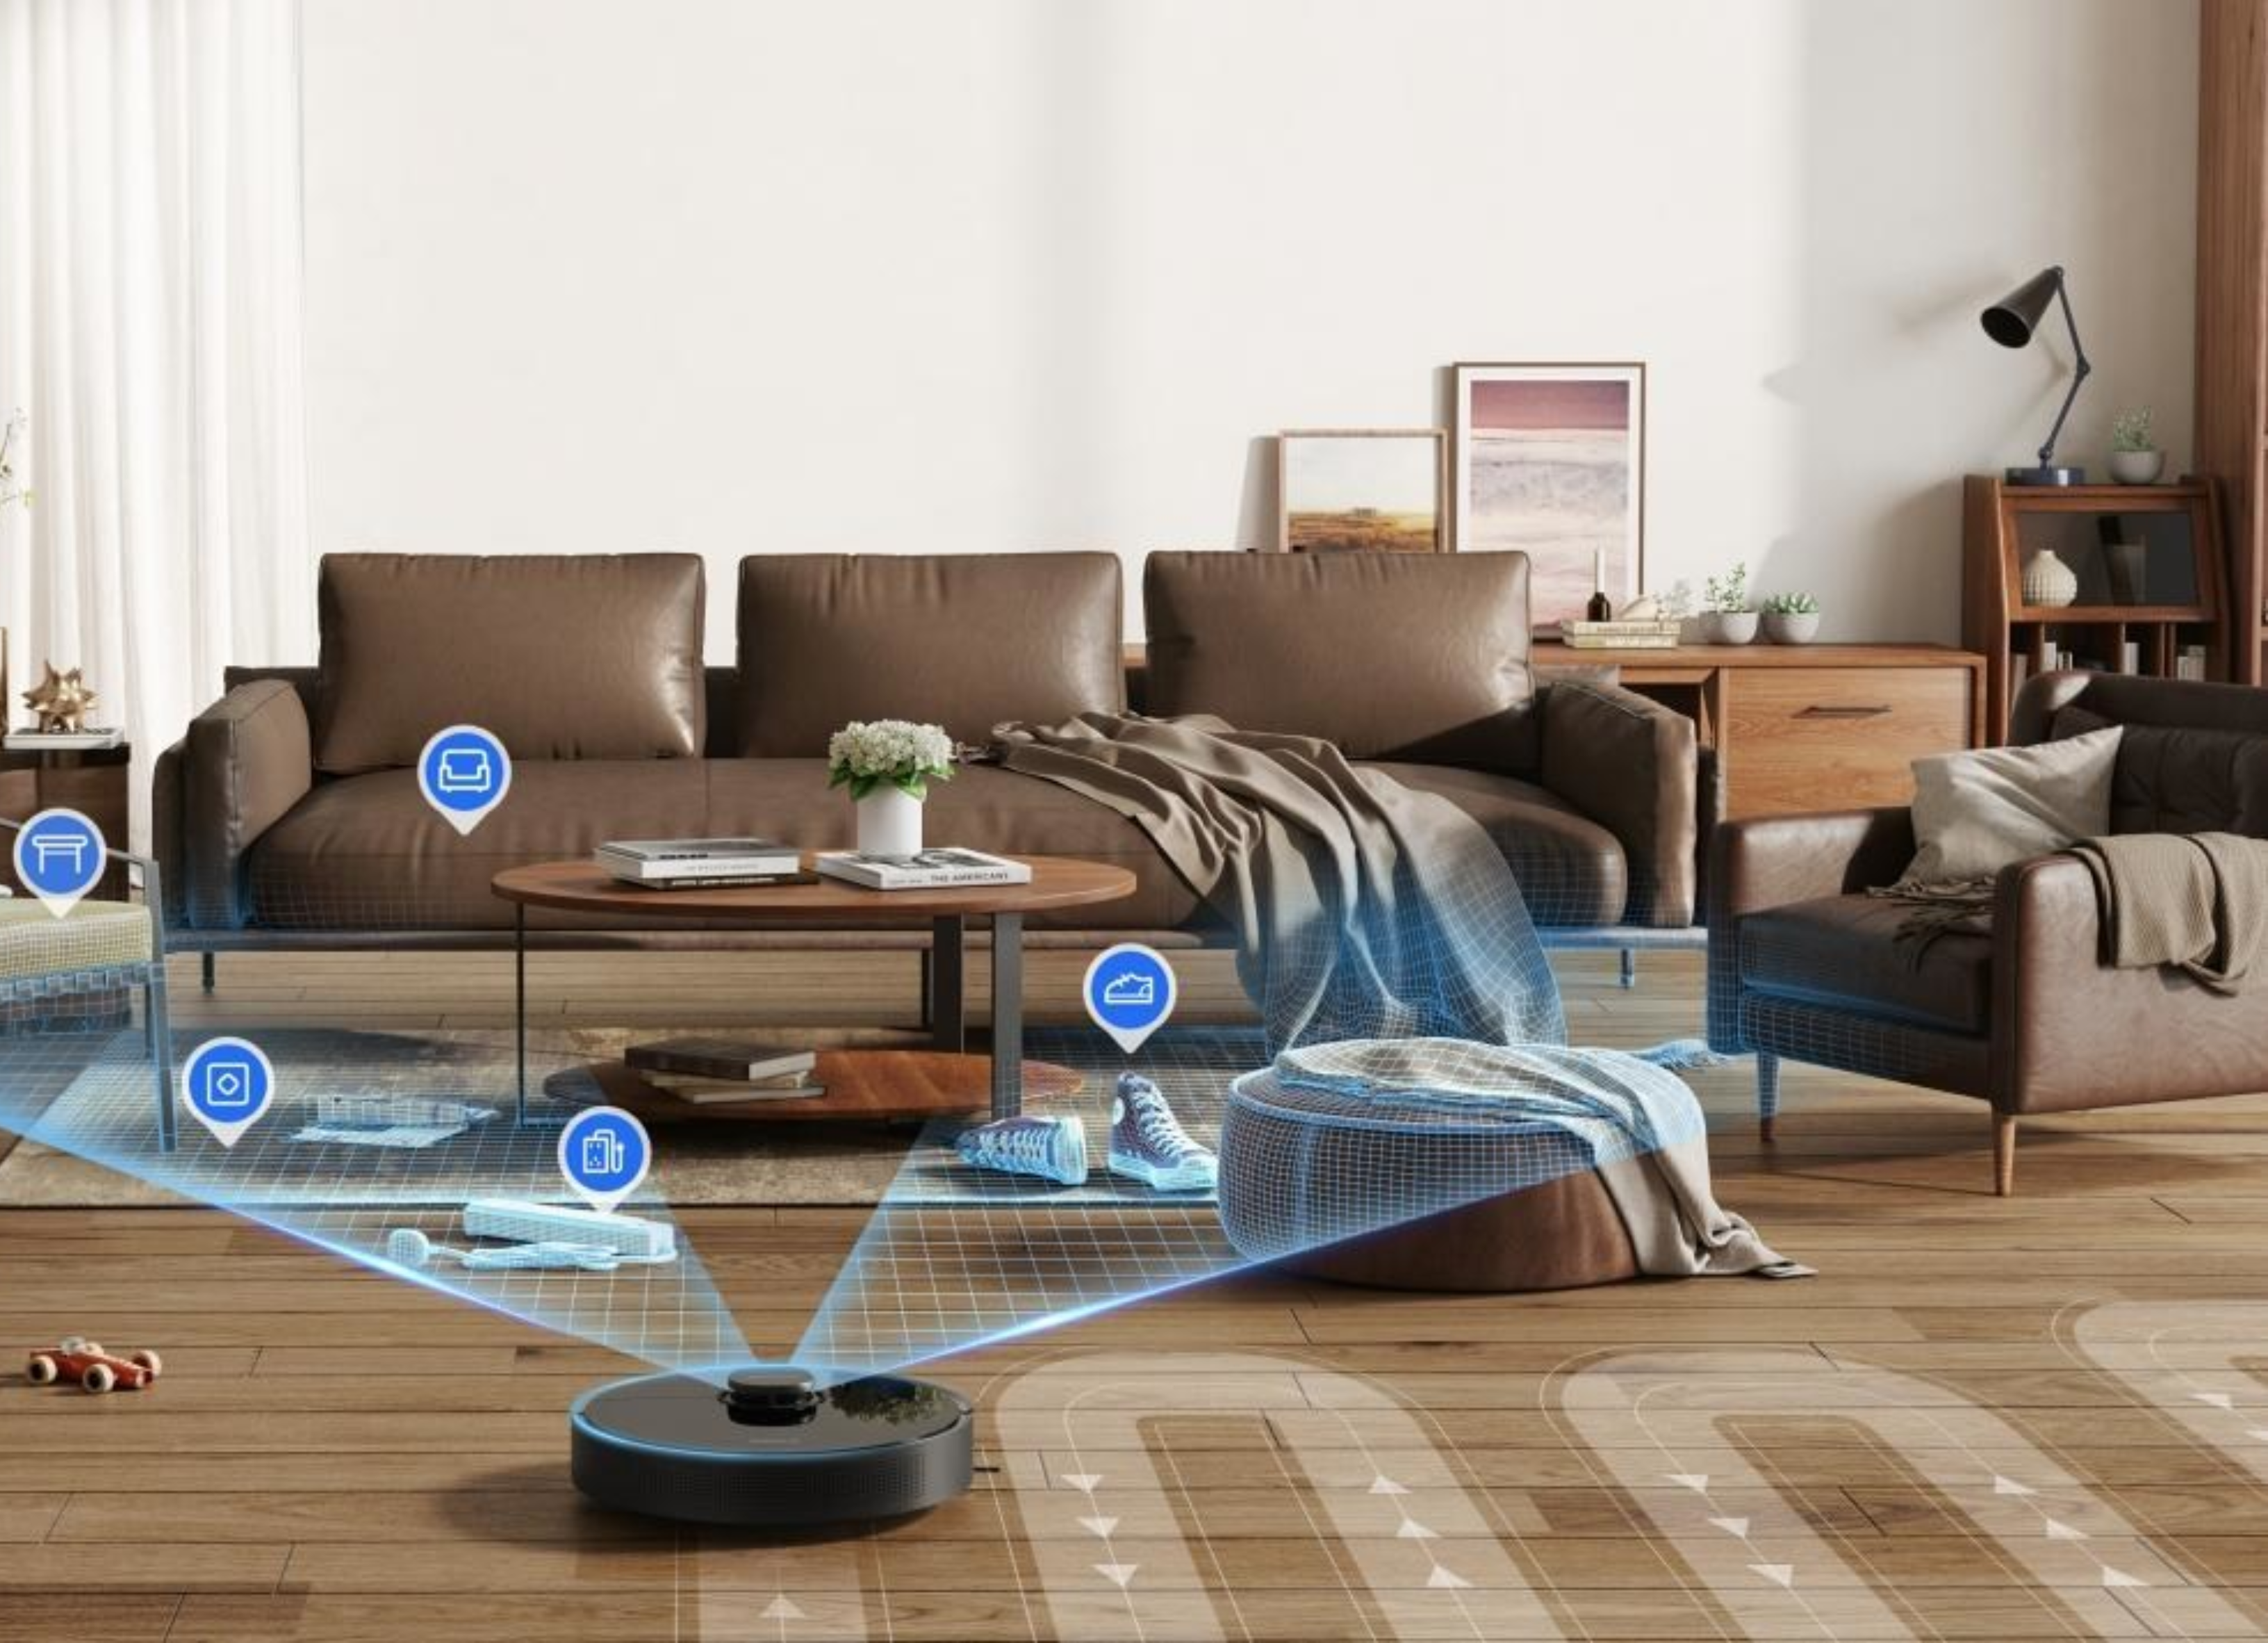 Dreame Technology launches new AI powered vacuum cleaner